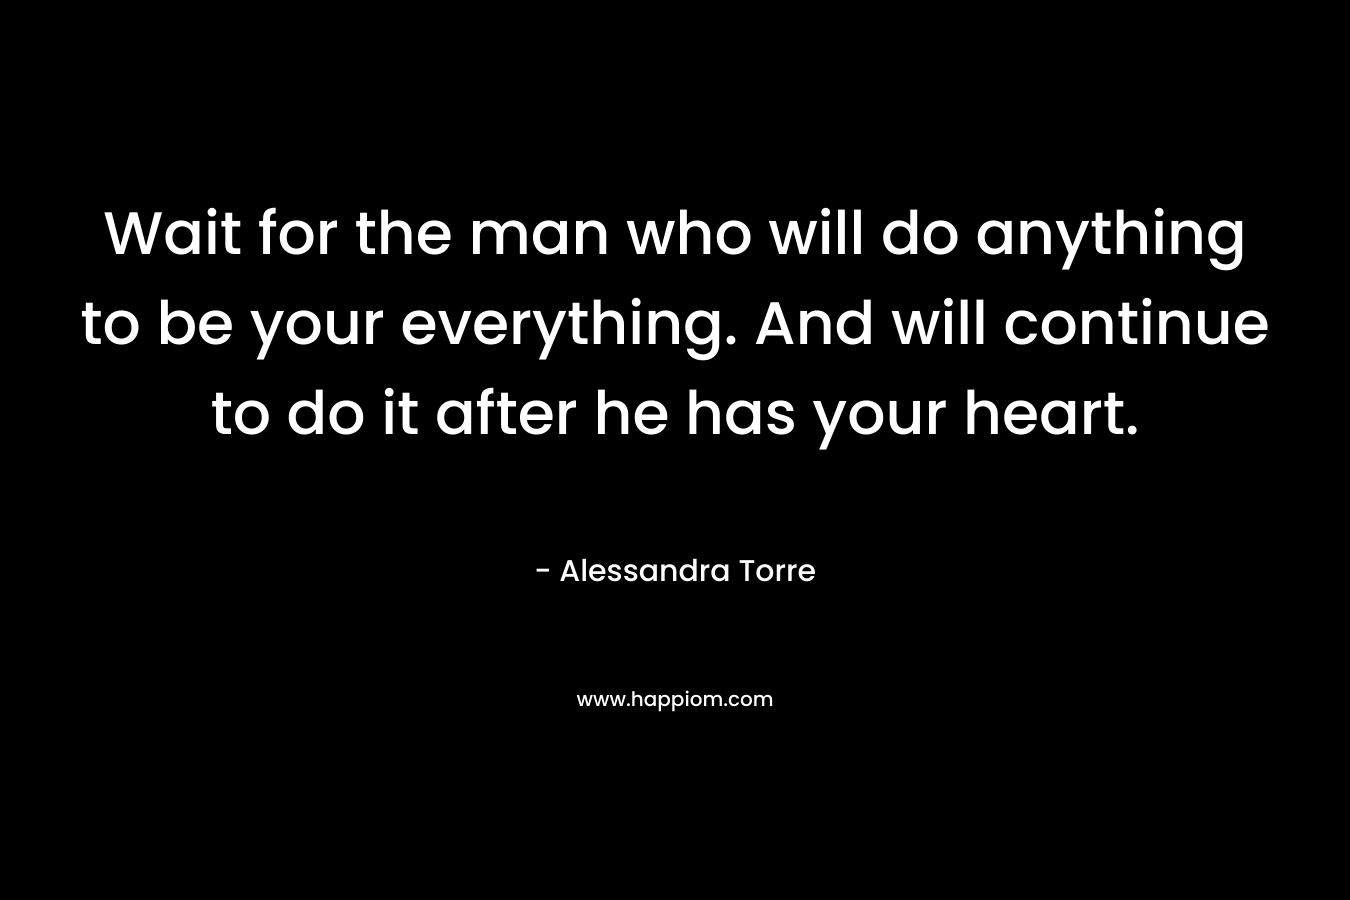 Wait for the man who will do anything to be your everything. And will continue to do it after he has your heart. – Alessandra Torre